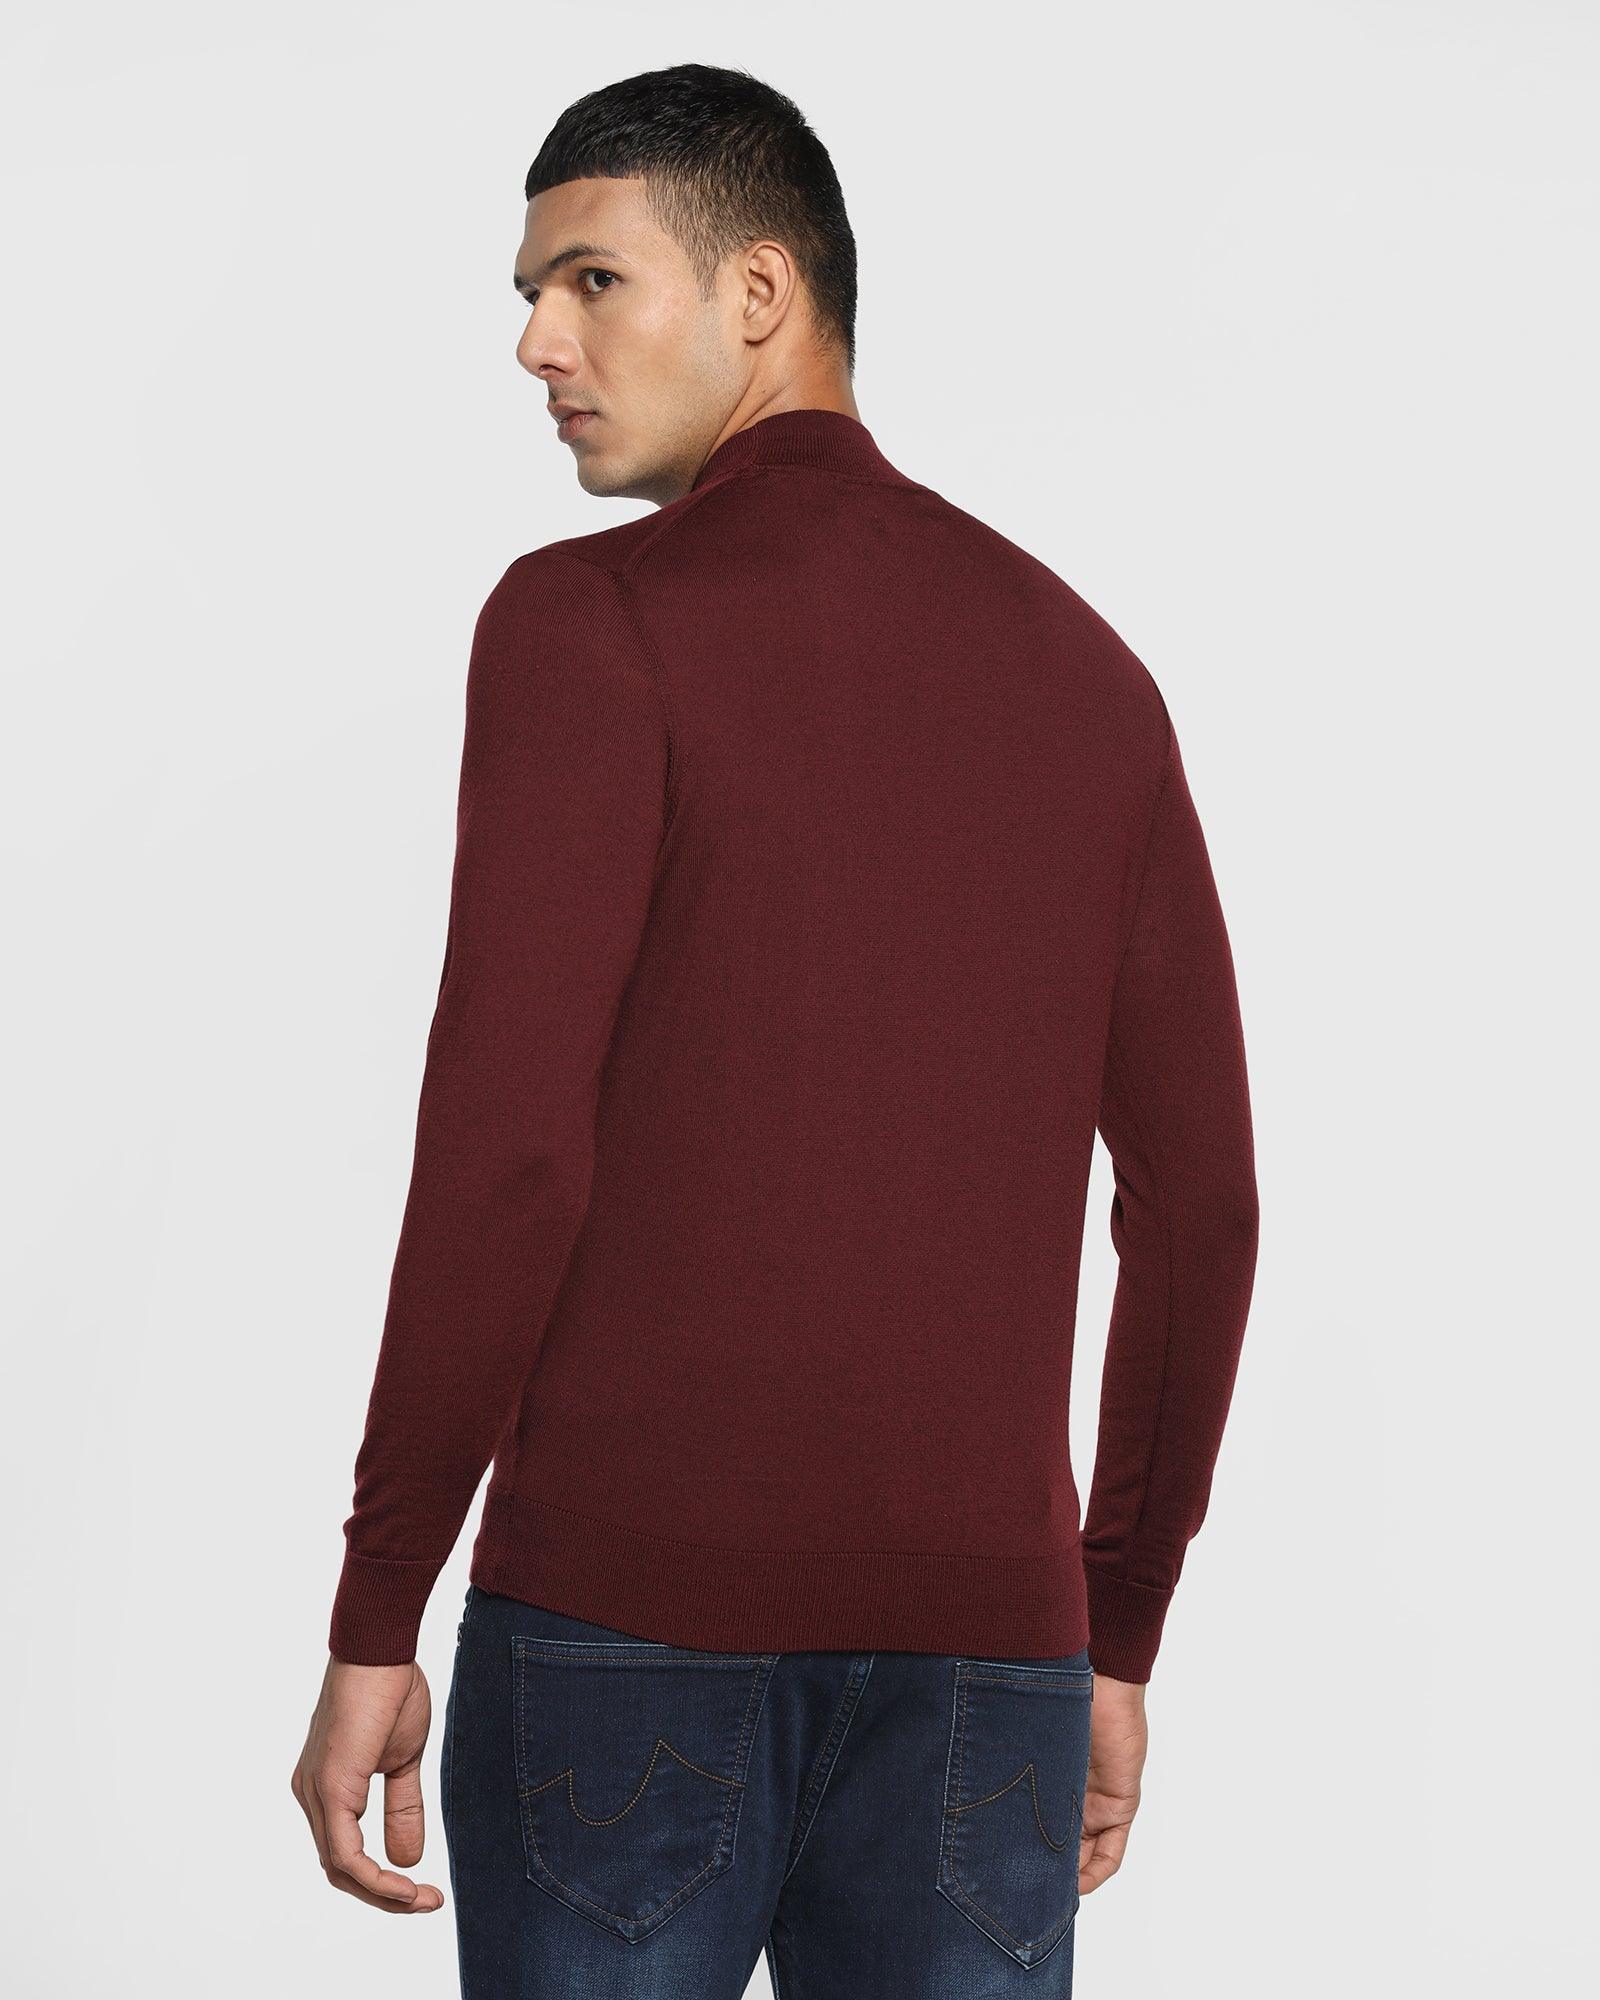 Stylized Collar Wine Solid Sweater - Domin